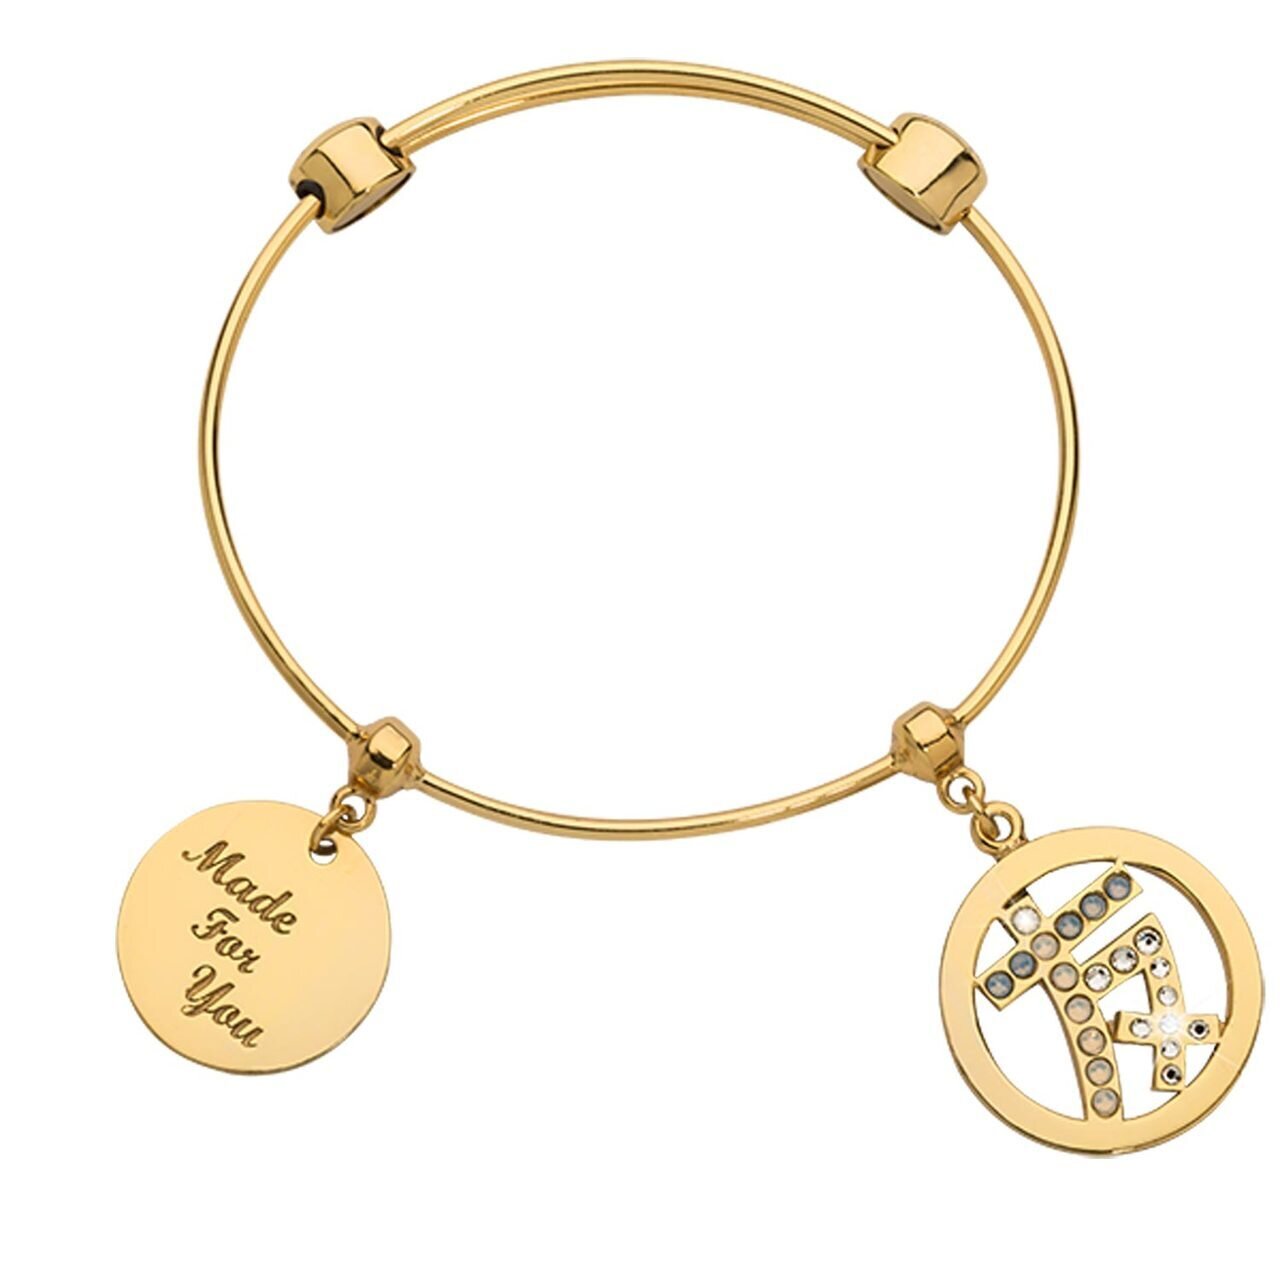 Nikki Lissoni Charm Bangle with Two Fixed Charms Infused with Emotion By Chinese Sign For Friendship Gold-plated 19cm B1150G19